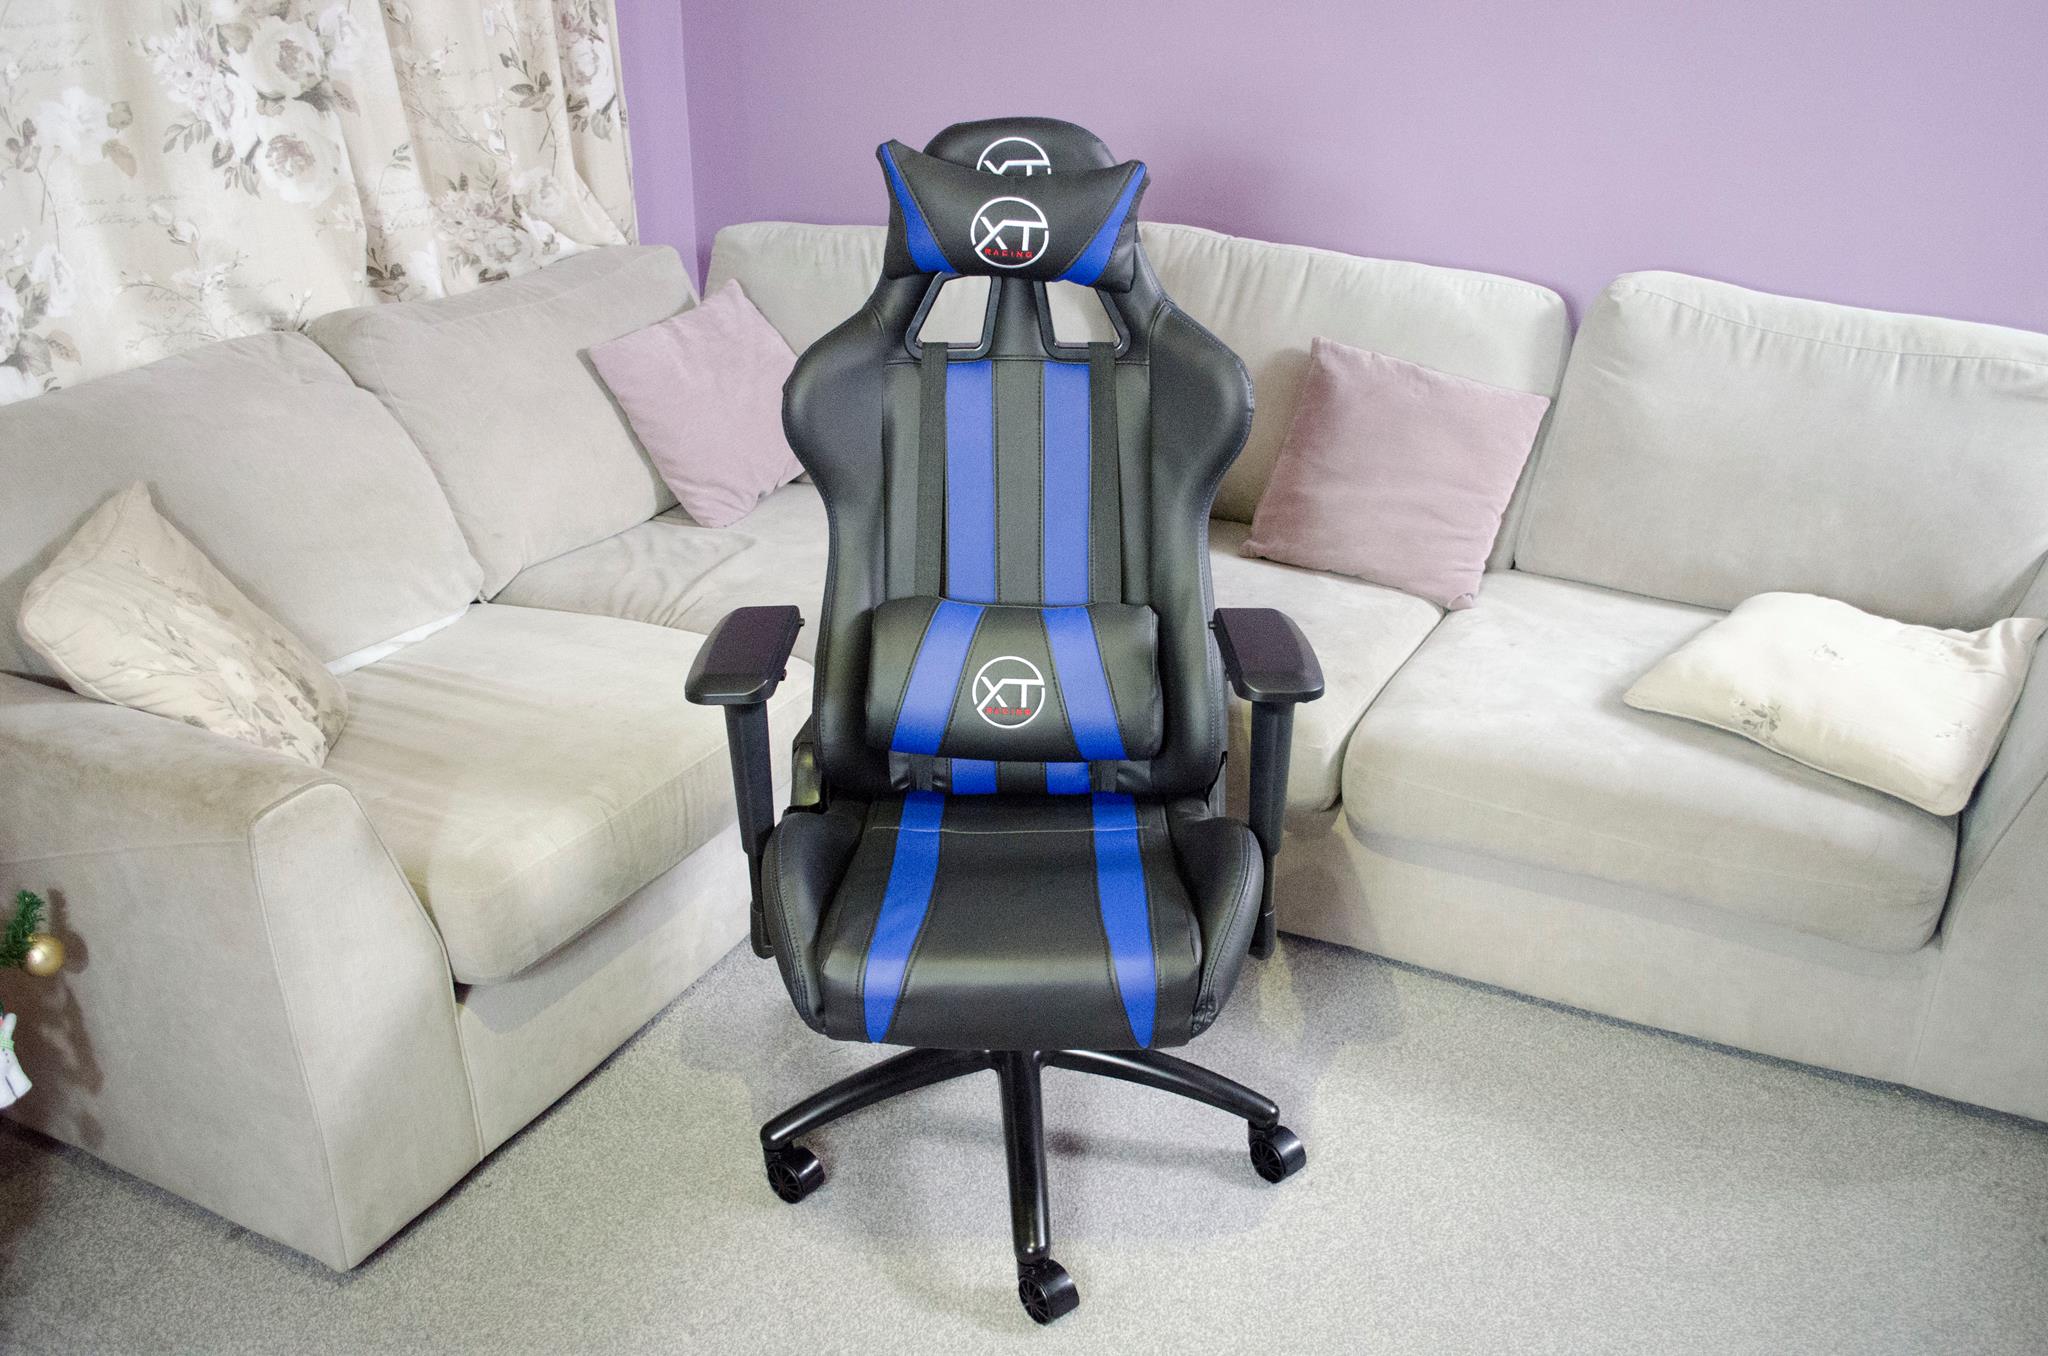 xt racing evo series gaming chair review